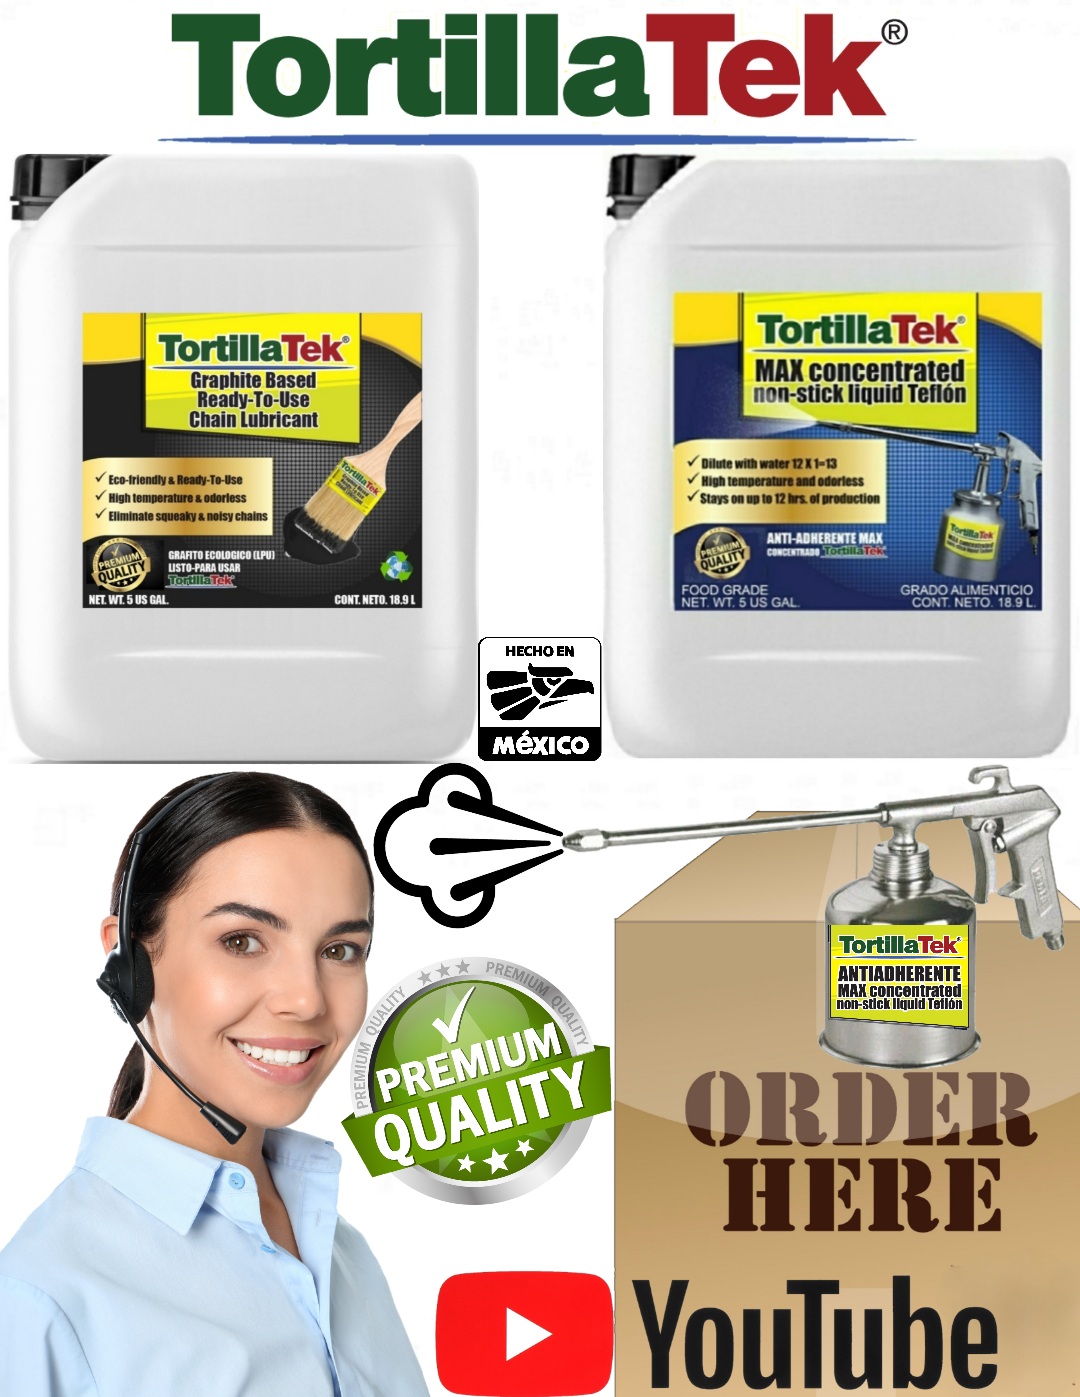 TortillaTek® MAX concentrated & Ready-To-Use (RTU) non-stick liquid teflon and Eco-Friendly Ready-To-Use Graphite based oven chain lubricant for sale